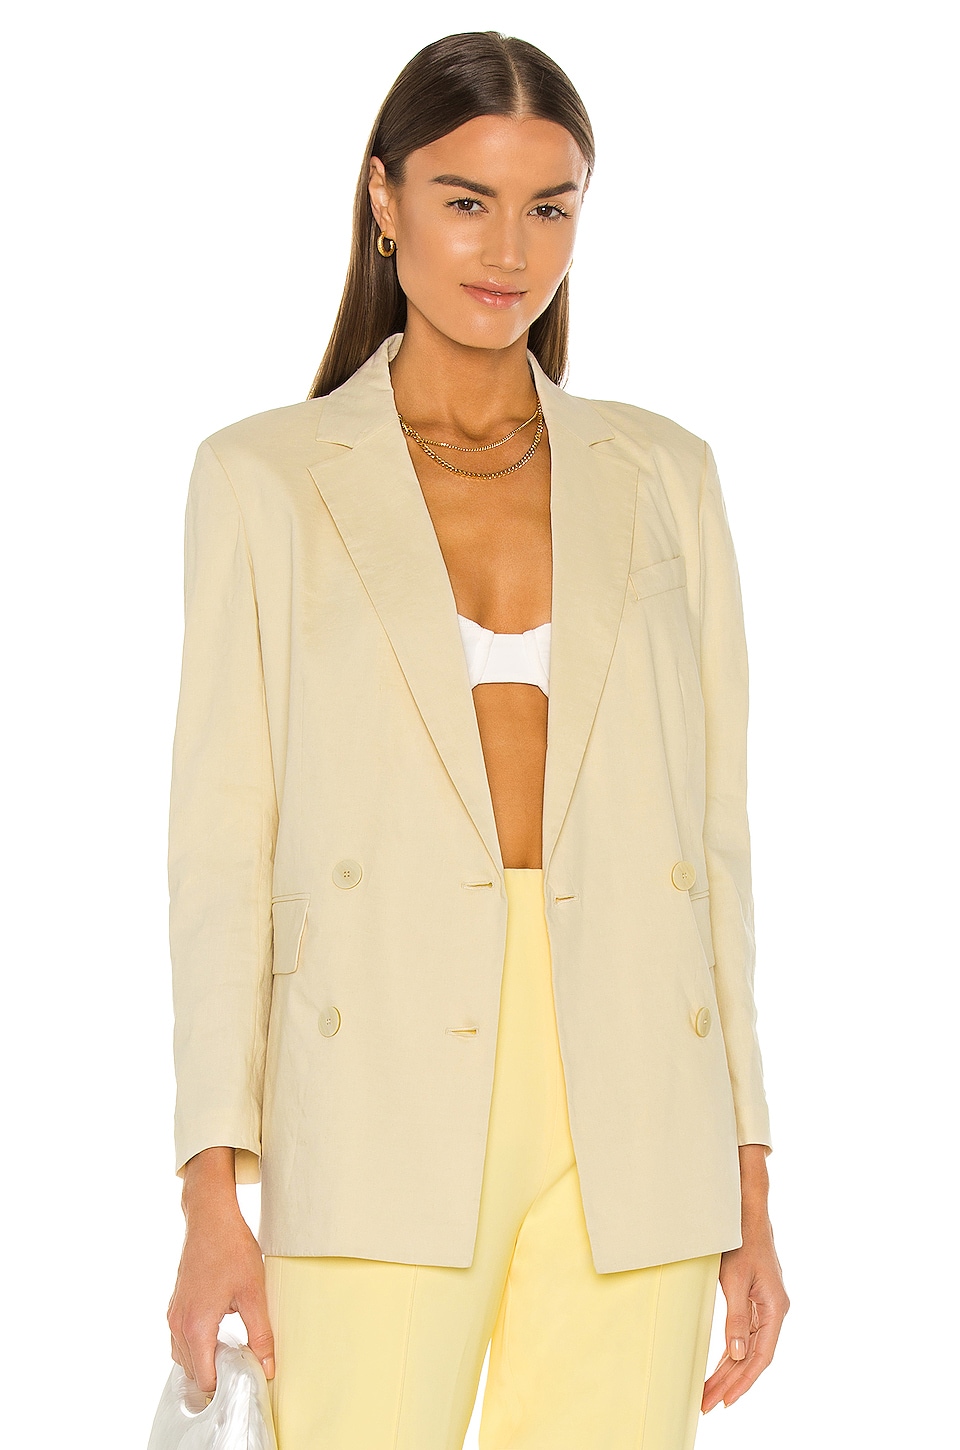 Theory Piazza Jacket in Light Linen | REVOLVE